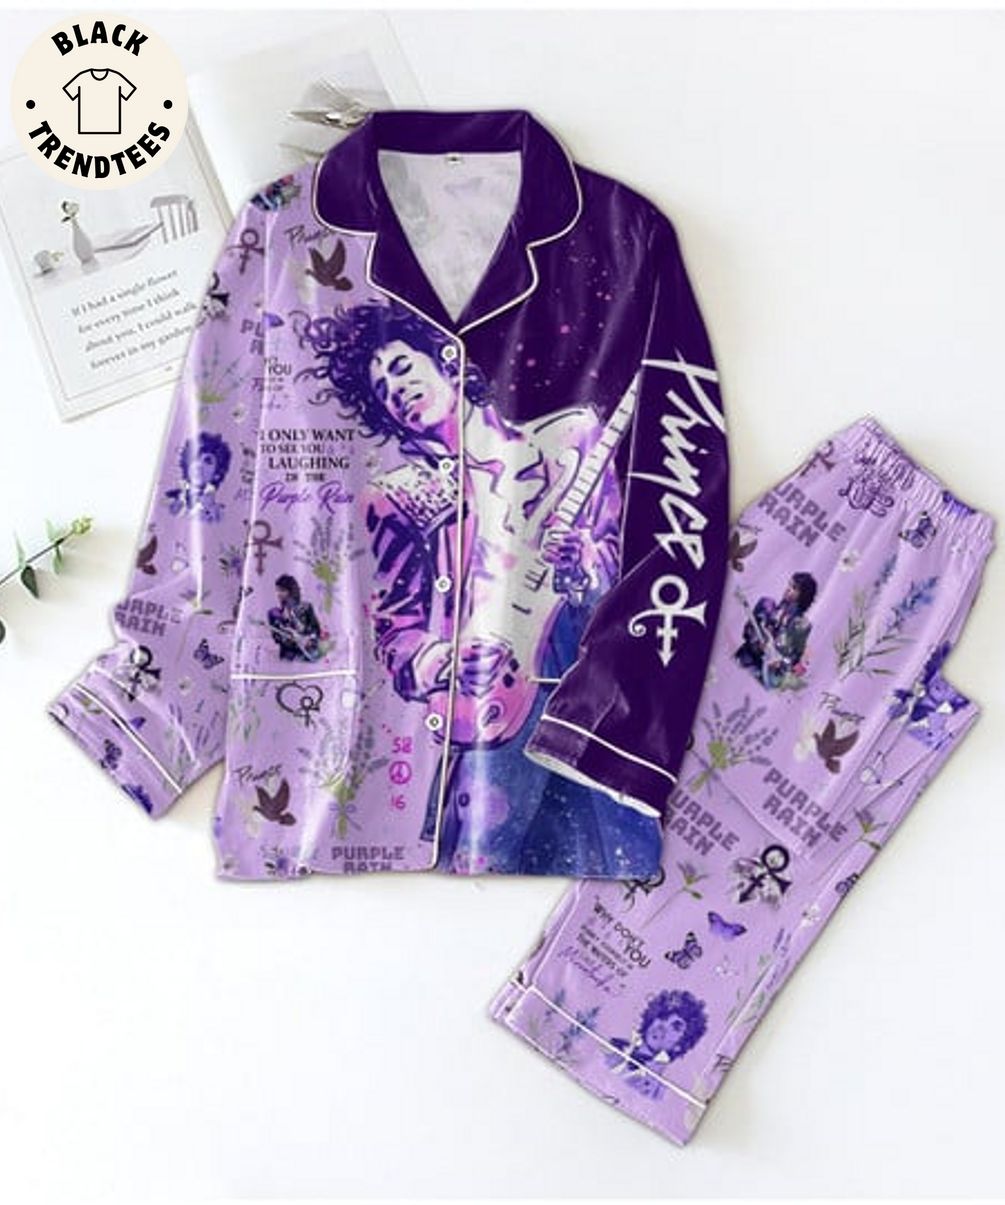 I Only Want To See You Laughing In The Purple Rain Pijamas Set